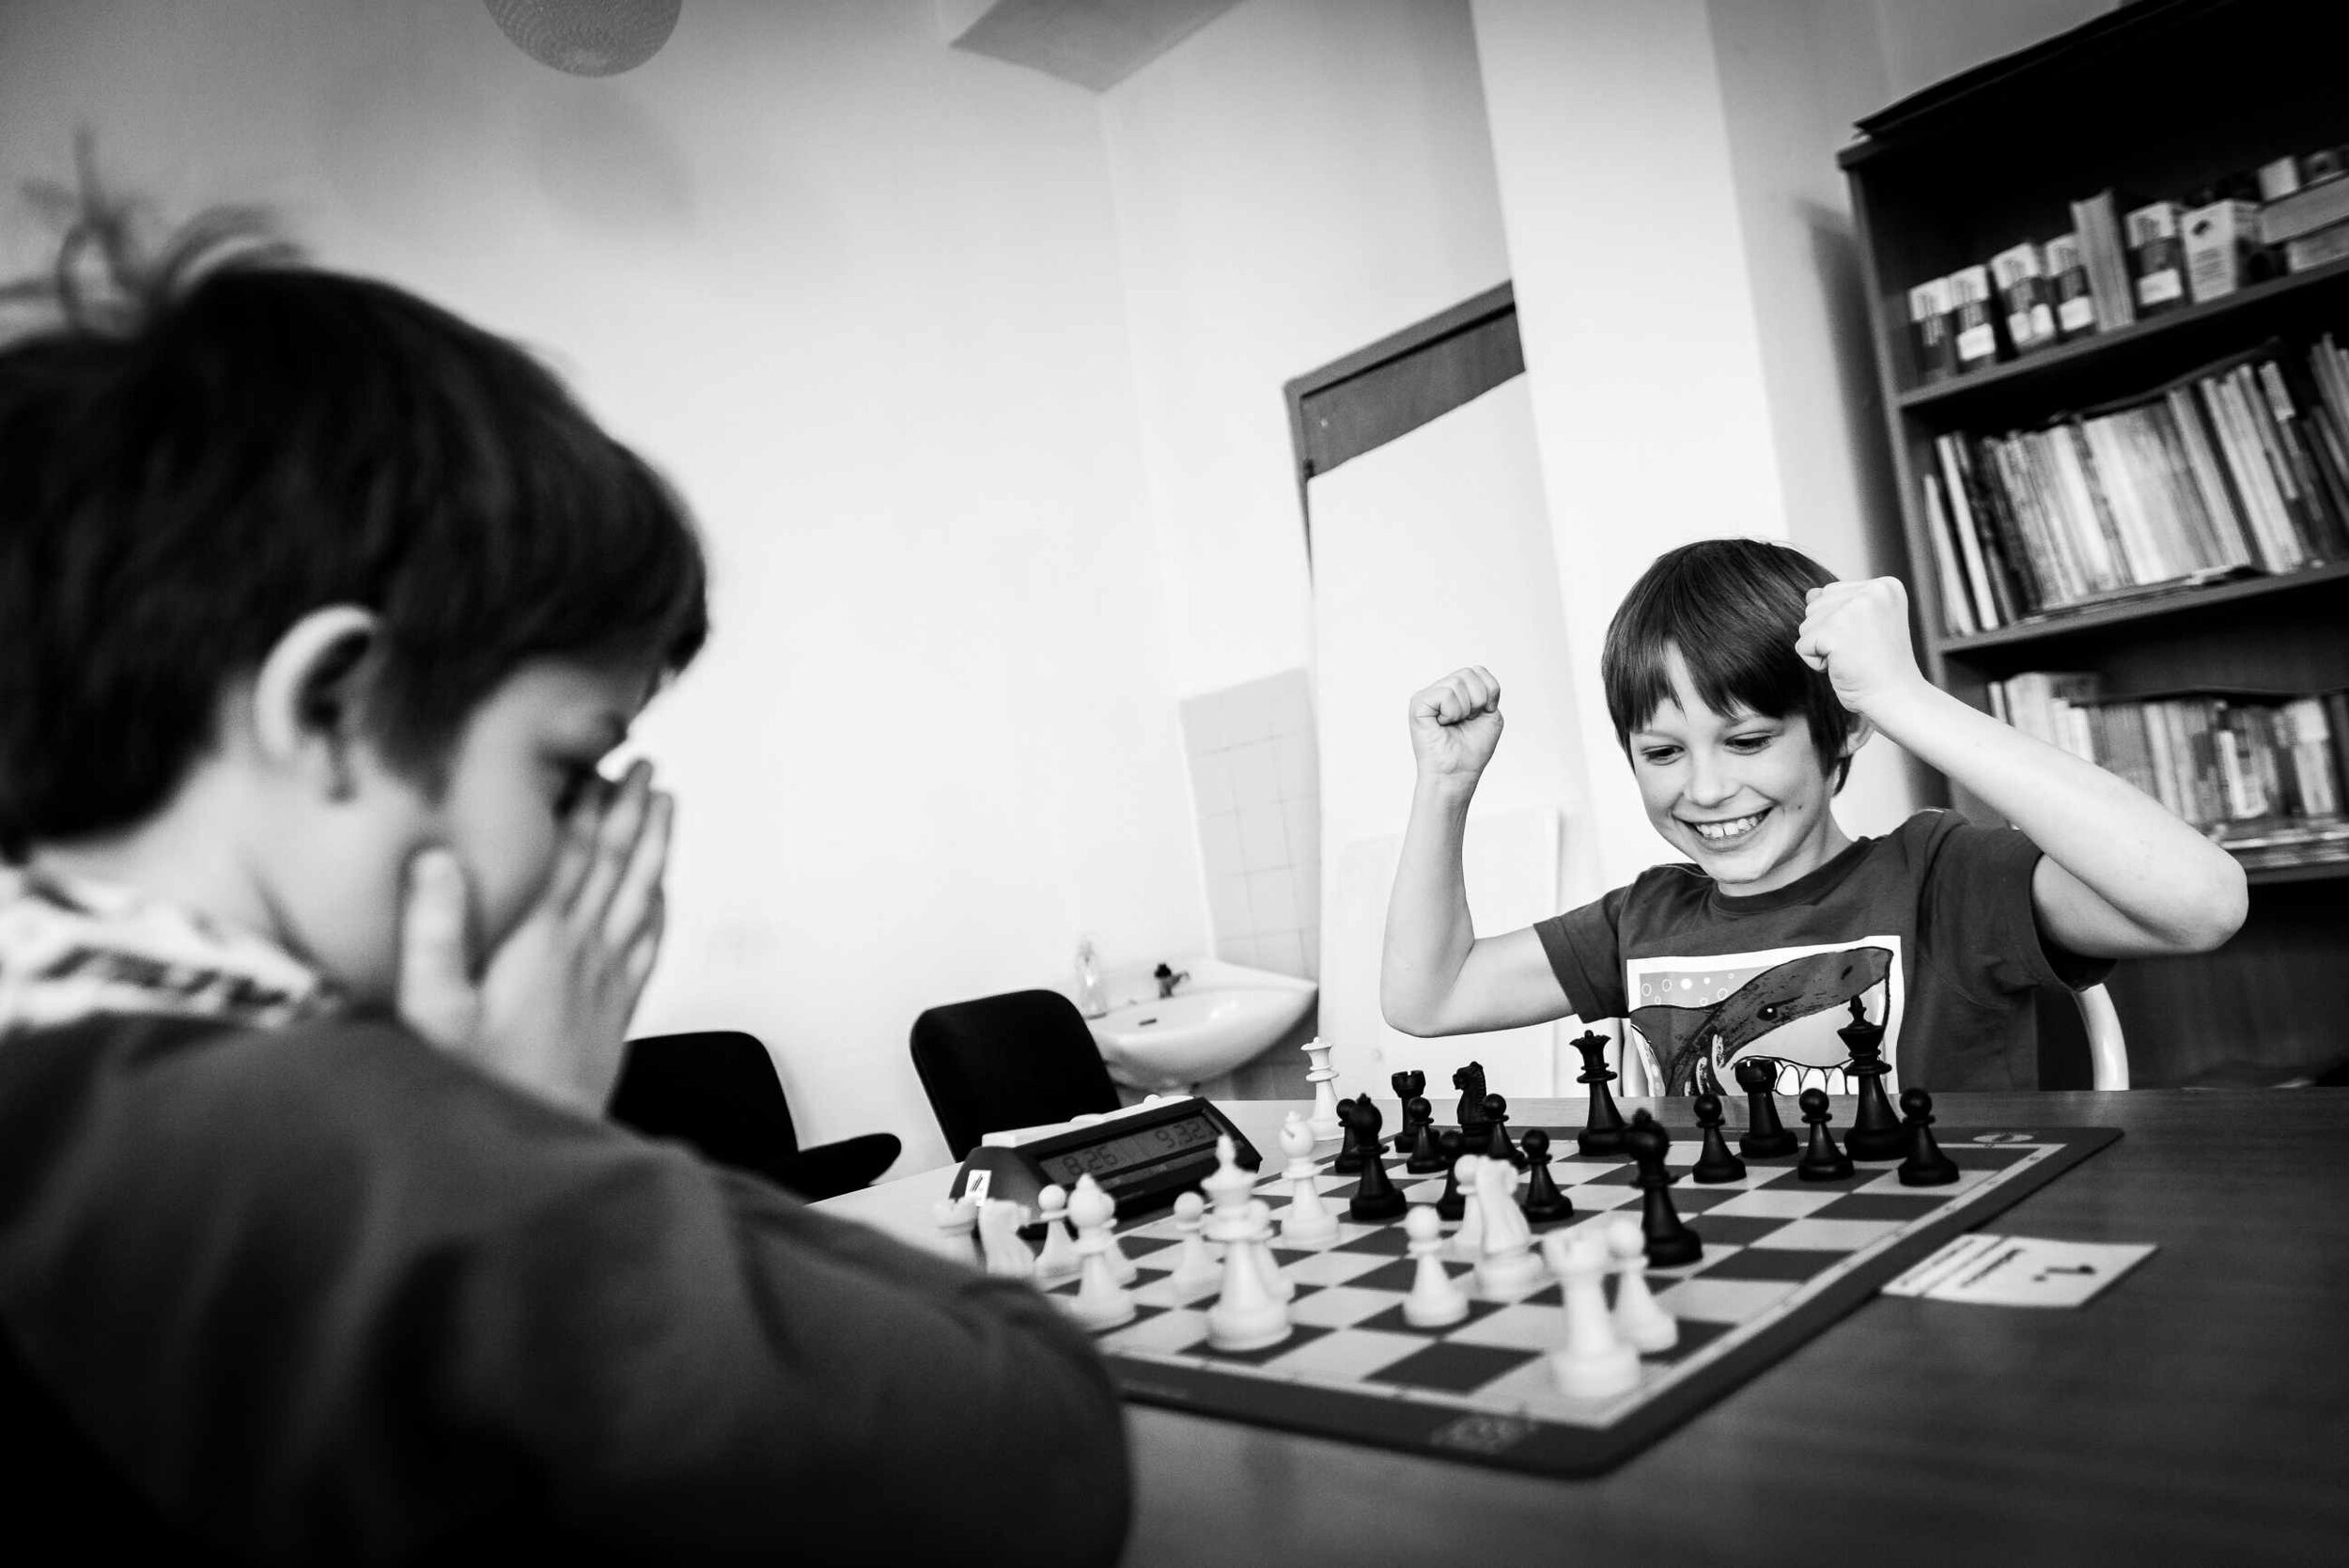 How to get a FIDE Rating - ZugZwang Academy